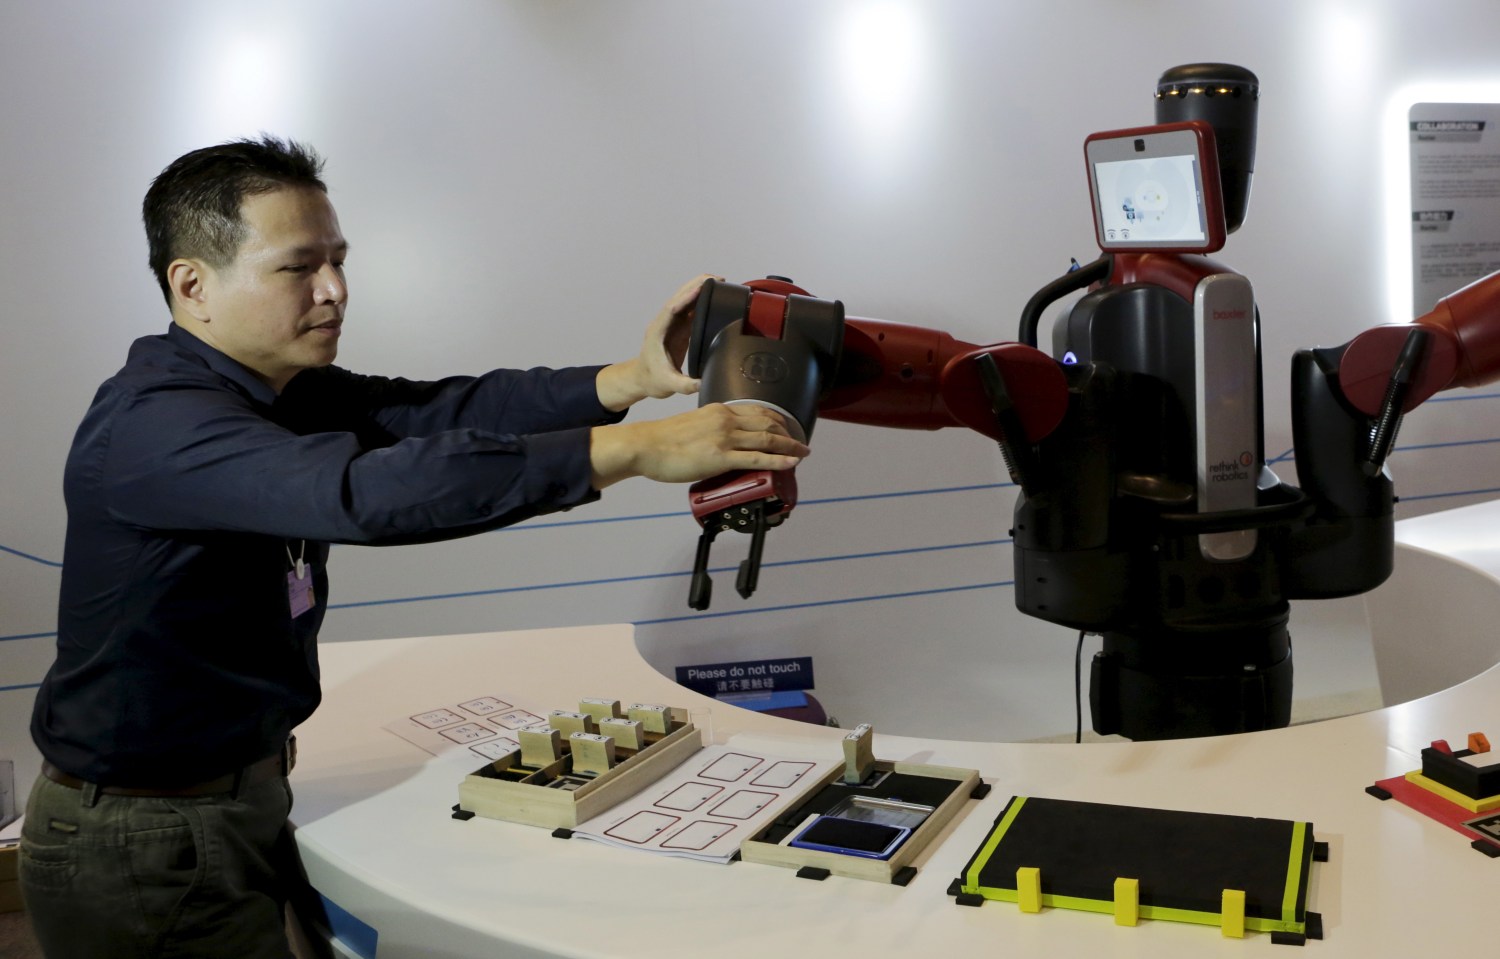 A staff member sets up the position of a mechanical hand for a Baxter robot of Rethink Robotics, during a display at the World Economic Forum (WEF), in China's port city Dalian, Liaoning province, China, September 9, 2015. Chinese robotics firms are grappling with a weakening economy and slumping automotive sector, and industry insiders already predict a market bubble just three years after the central government issued policies to spur robotics development. Picture taken September 9, 2015. REUTERS/Jason Lee  - GF10000208986